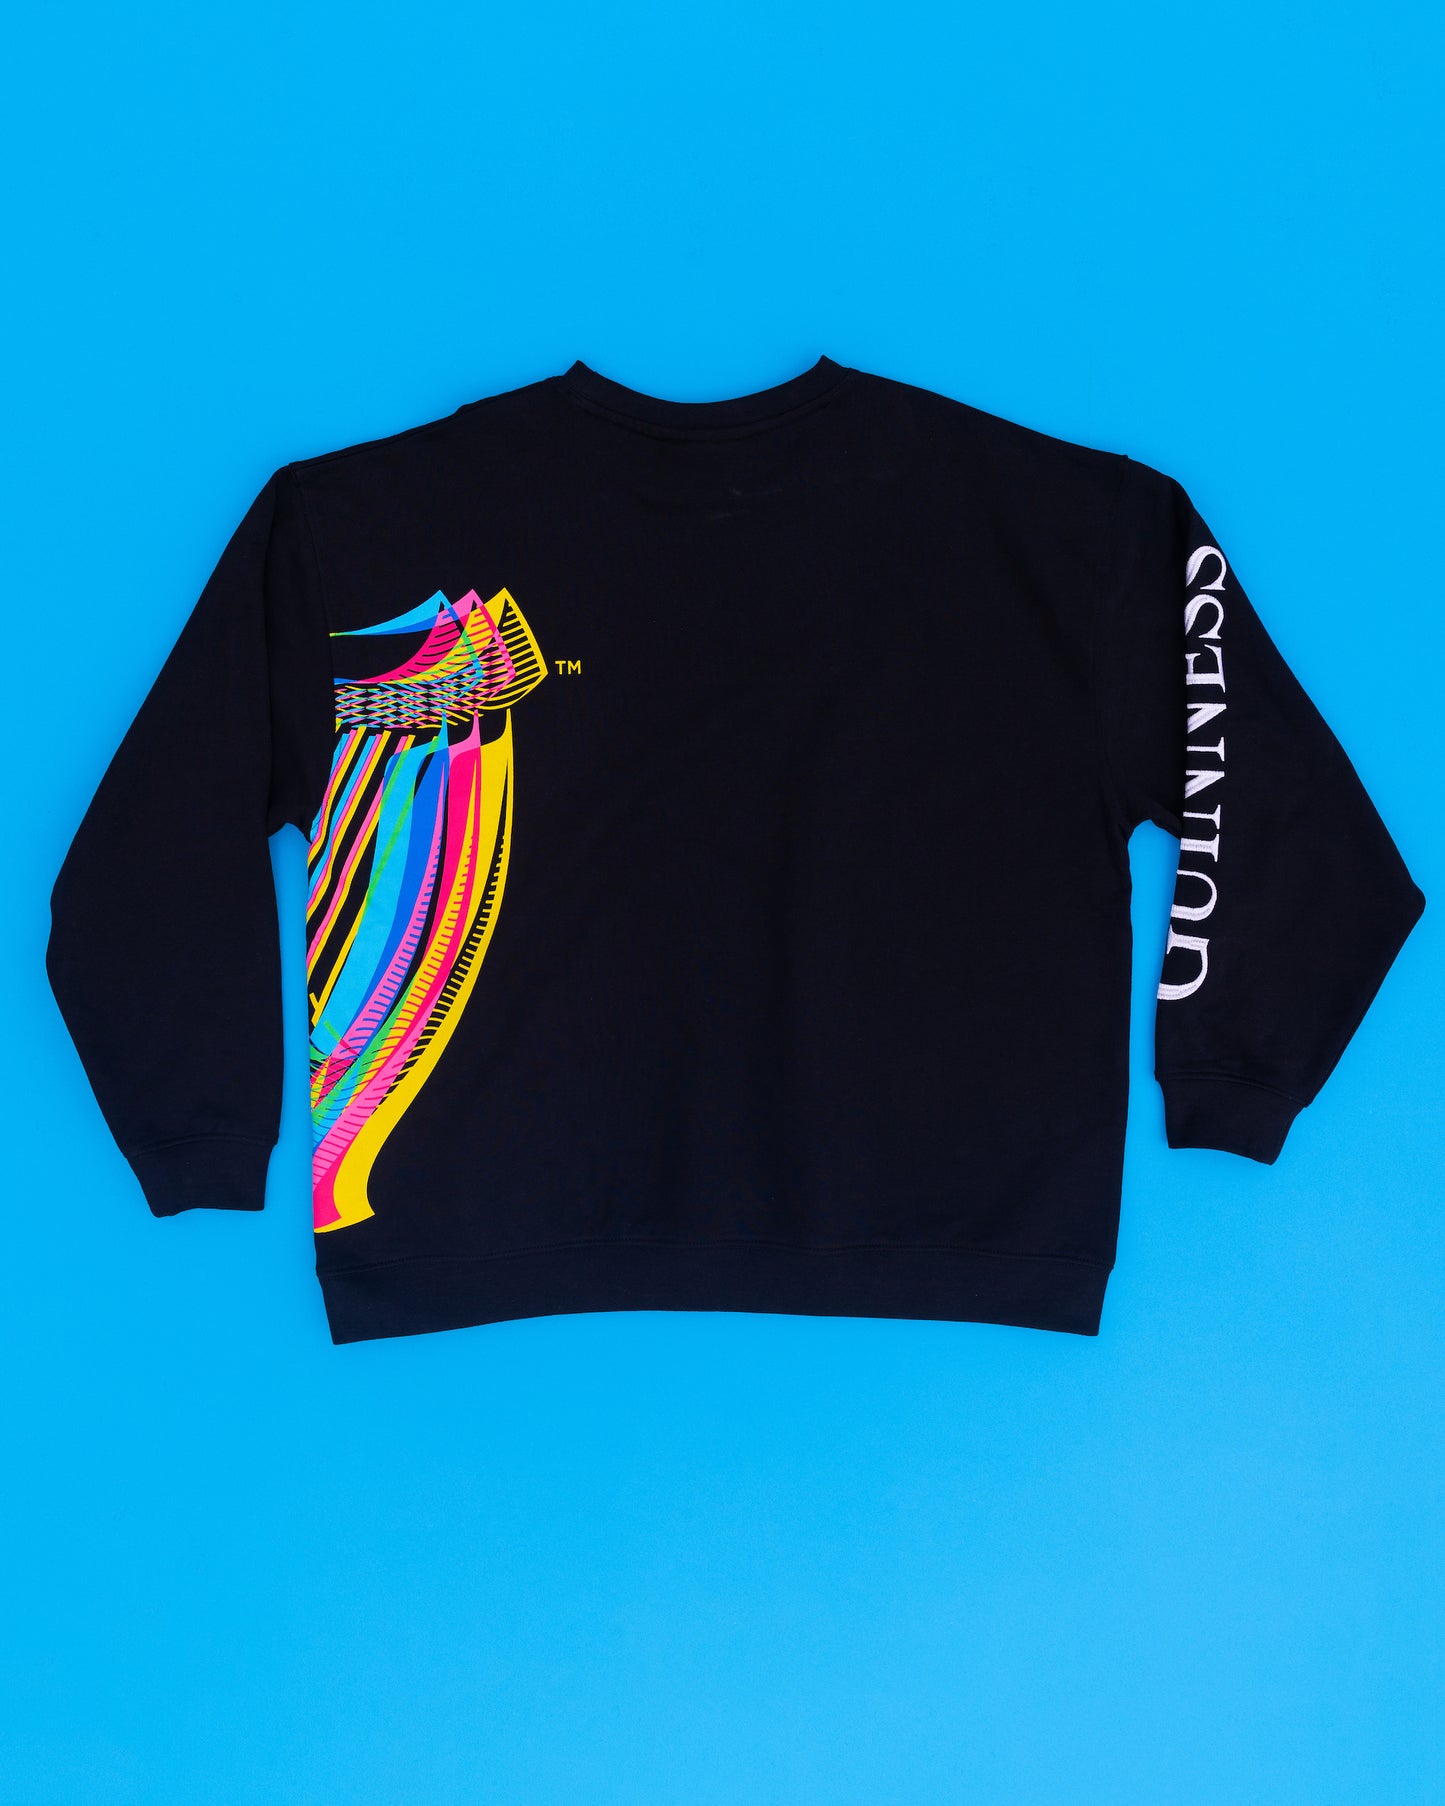 Back or the black Sweatshirt designed by the Irish graffiti artist, Aches for Guinness Storehouse Exclusive. 100% organic cotton with quality print Guinness harp